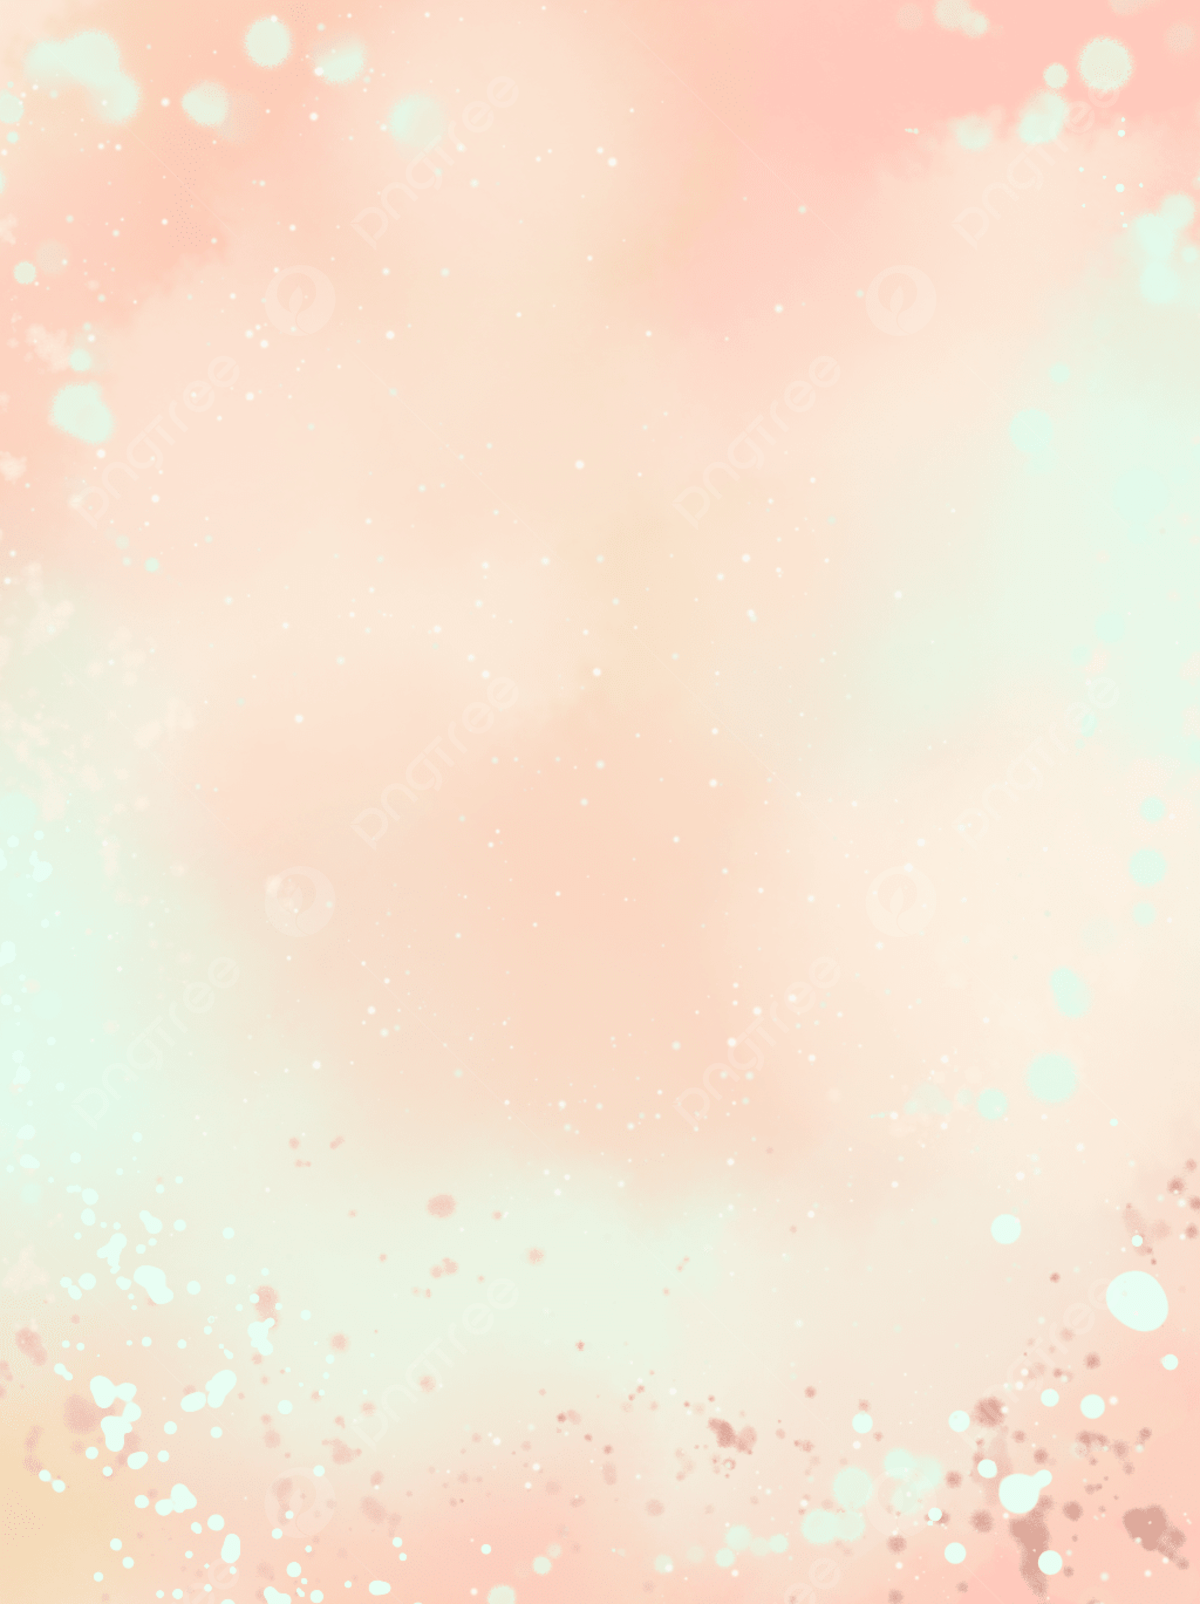 Watercolor Halo Dye Sweet Wind Background Wallpaper Image For Free Download